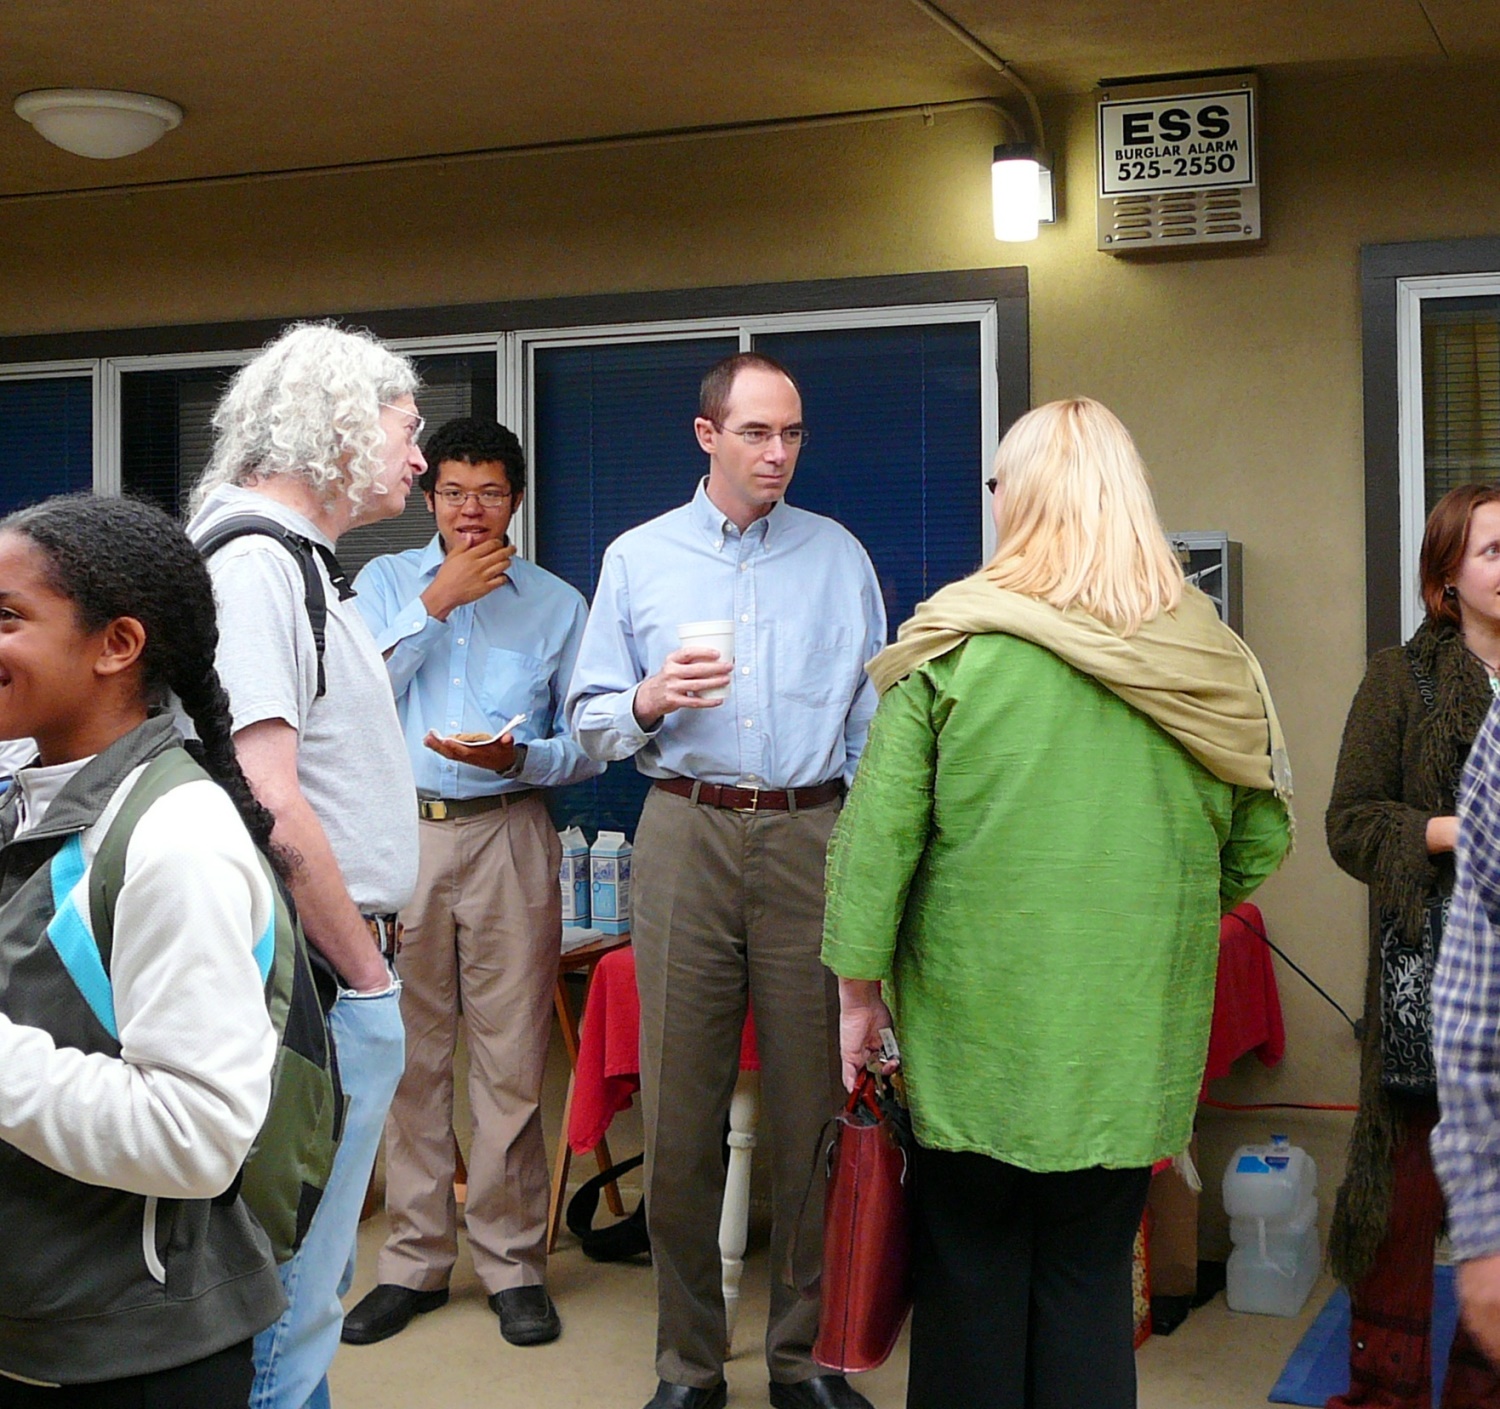 Mark Chatting at Bay Area center after Classes